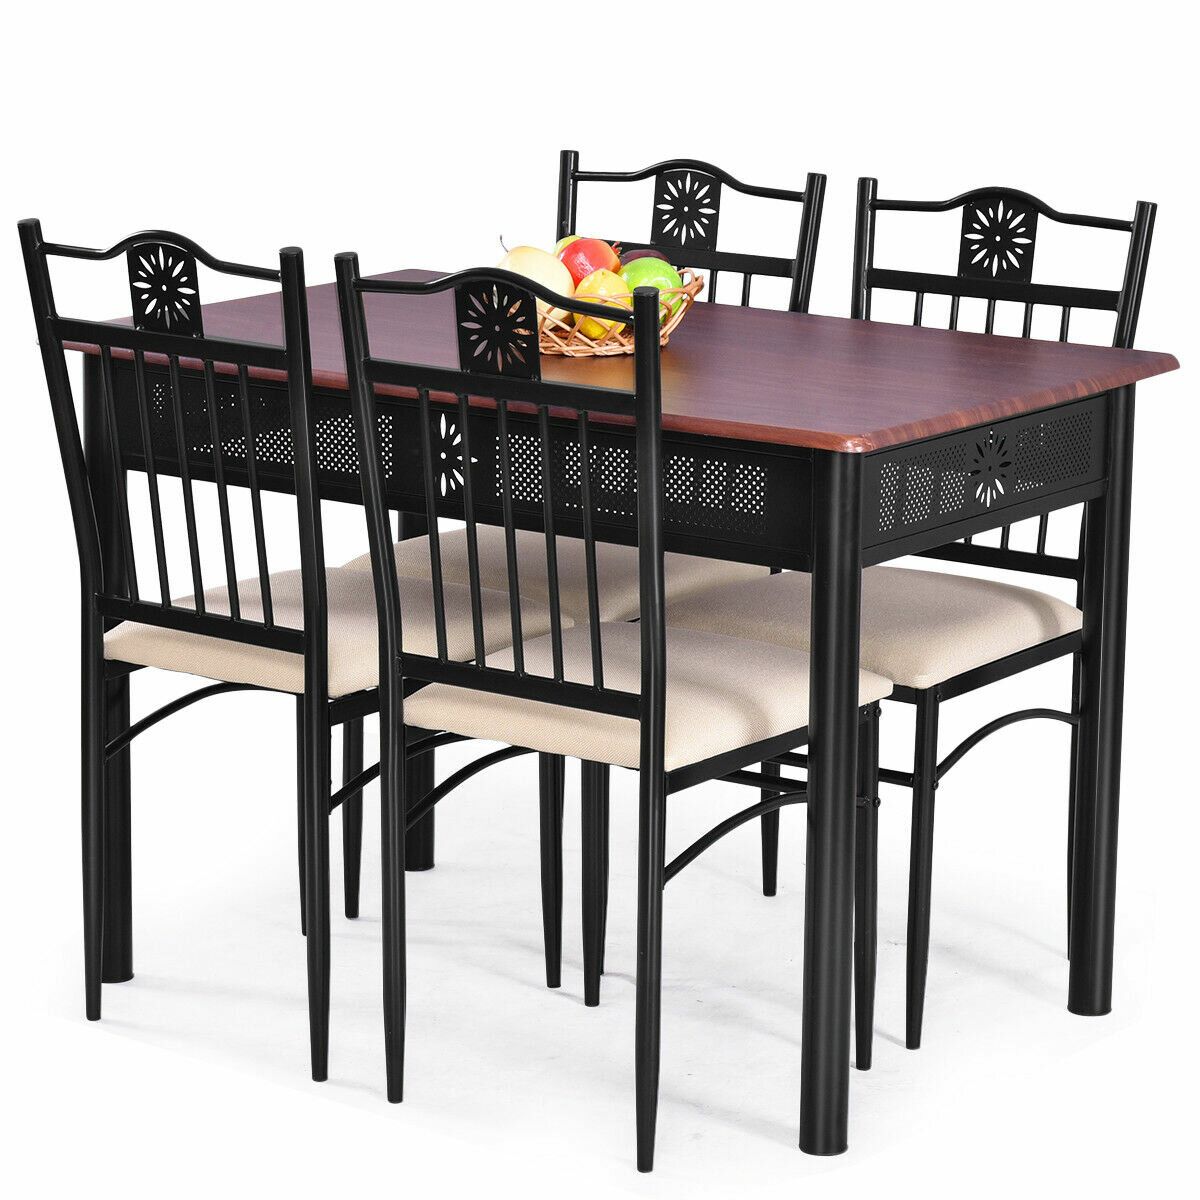 Ganya 5 Piece Dining Set Throughout 2018 Conover 5 Piece Dining Sets (View 4 of 20)